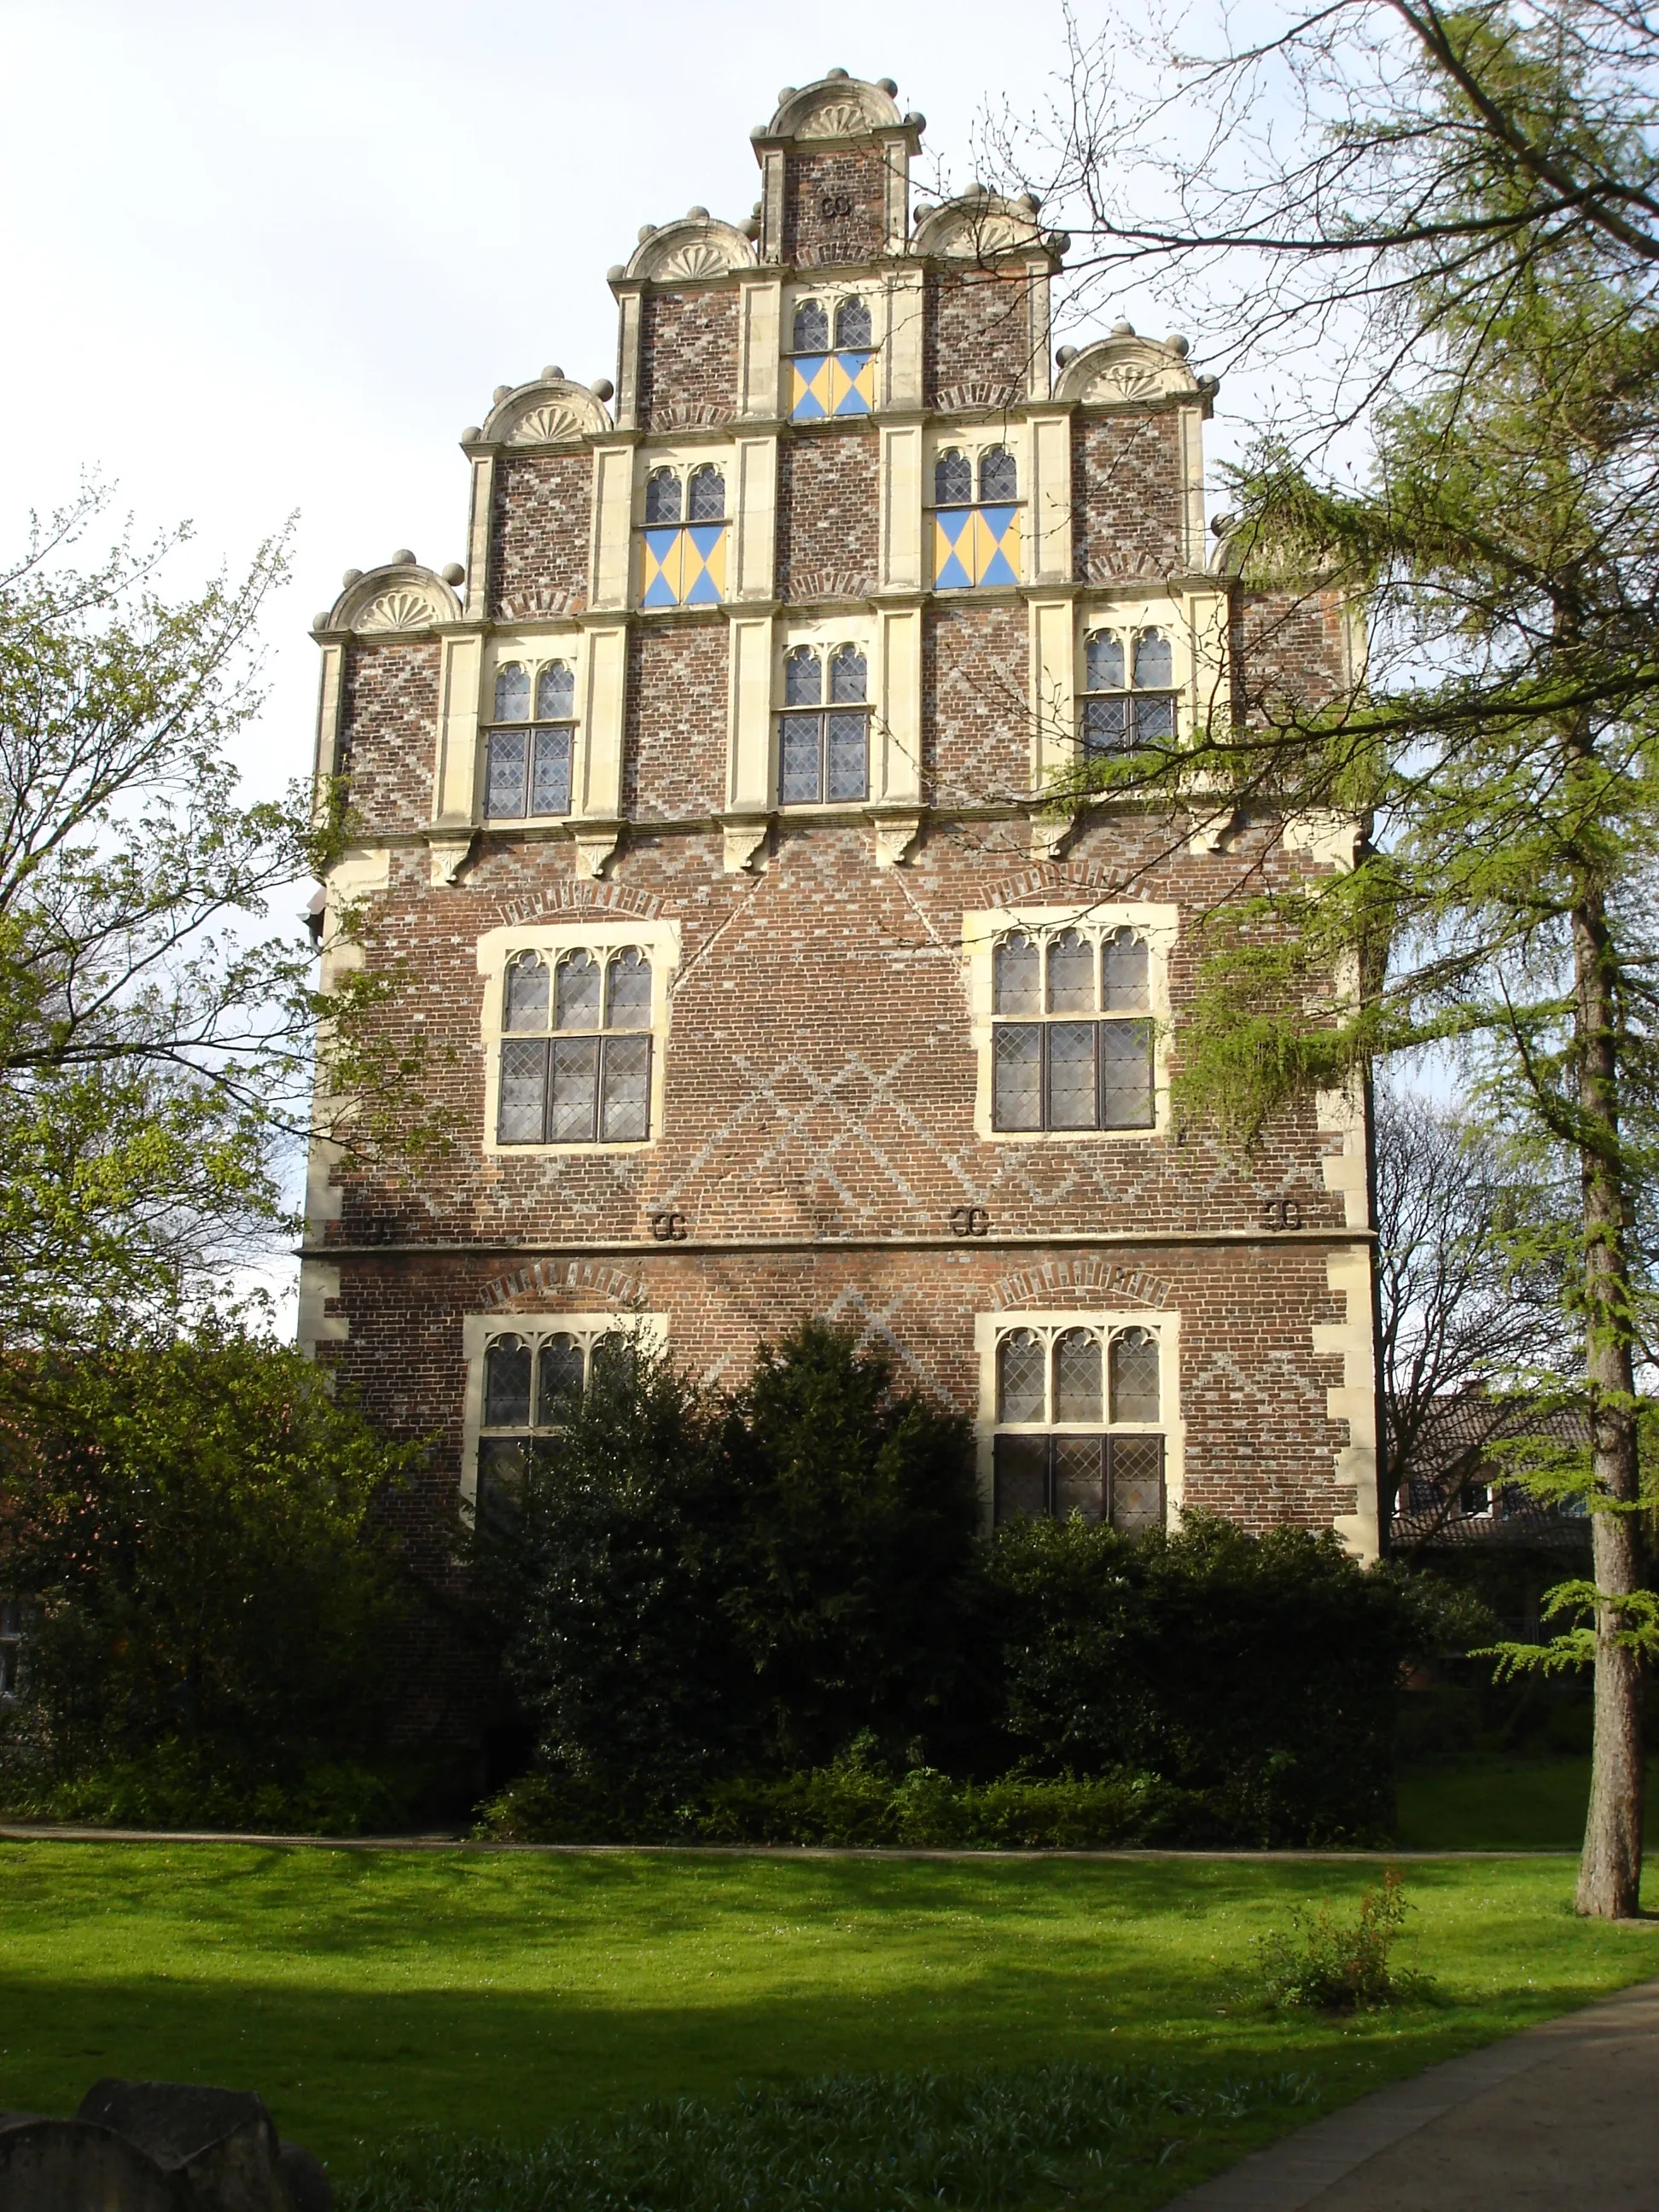 Photo showing: Gable of the "Drostenhof" in Wolbeck, borough of Münster, Westphalia, Germany